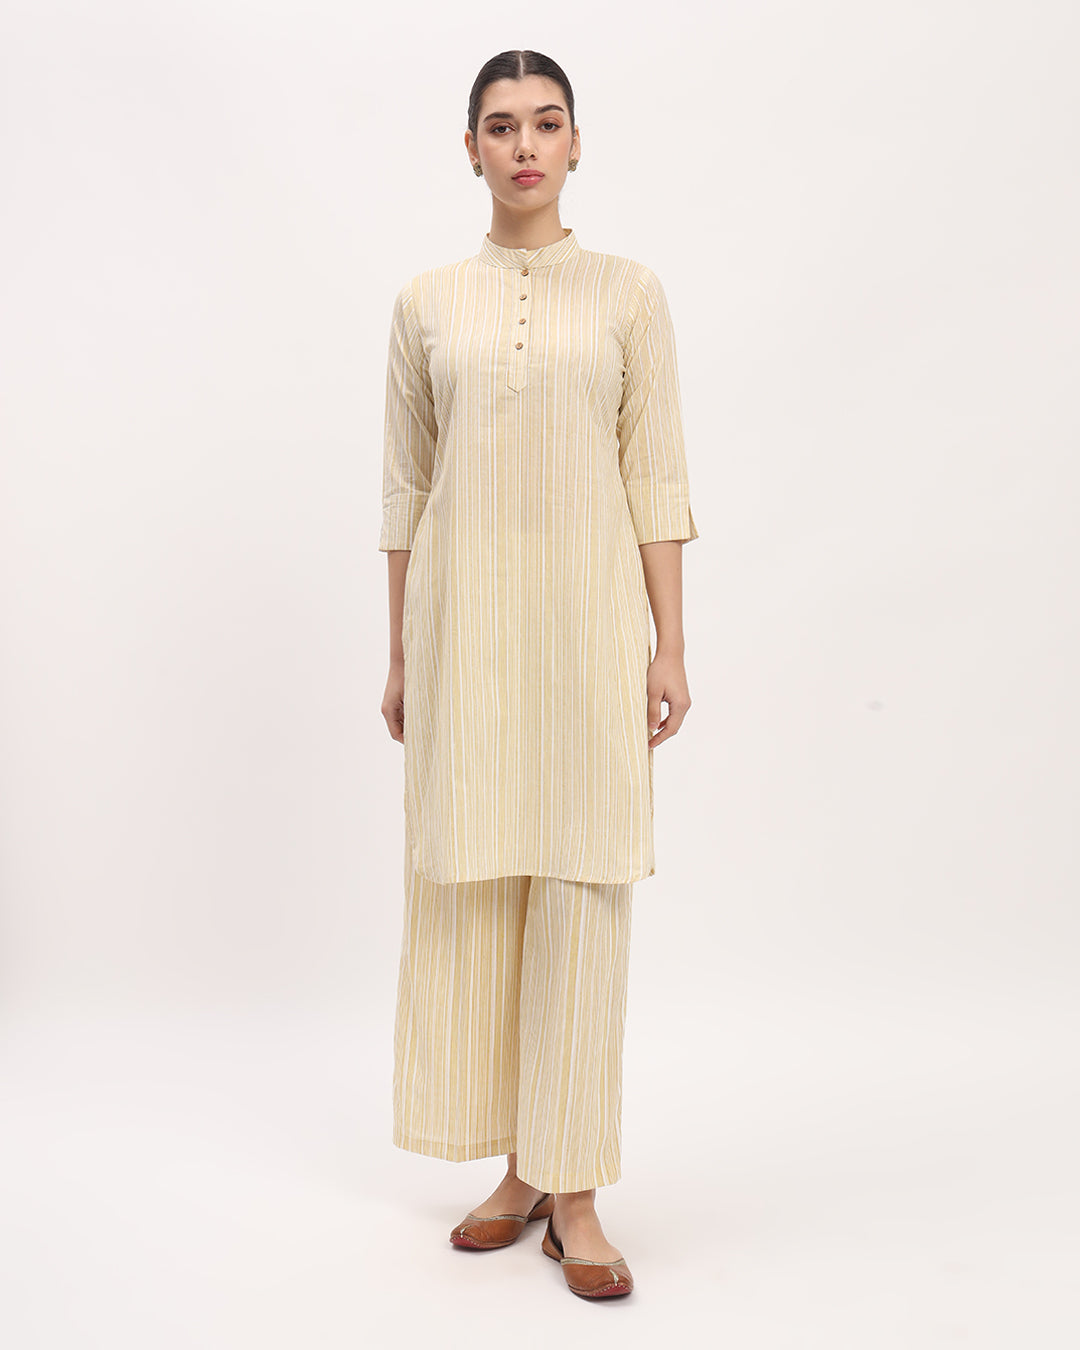 Combo: English Floral Garden & Yellow Chic Lines Band Collar Neck Printed Kurta (Without Bottoms)